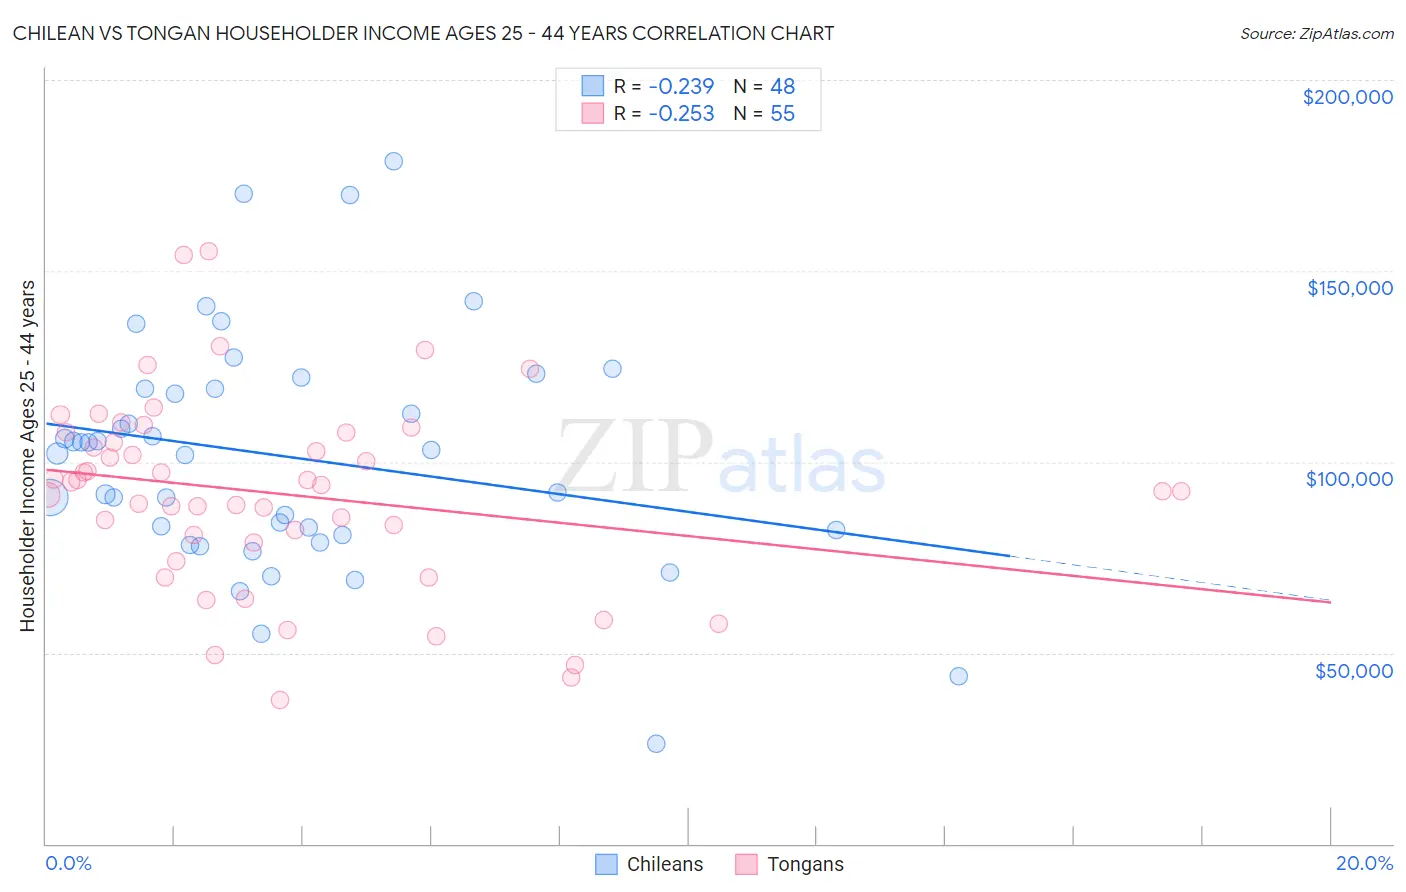 Chilean vs Tongan Householder Income Ages 25 - 44 years